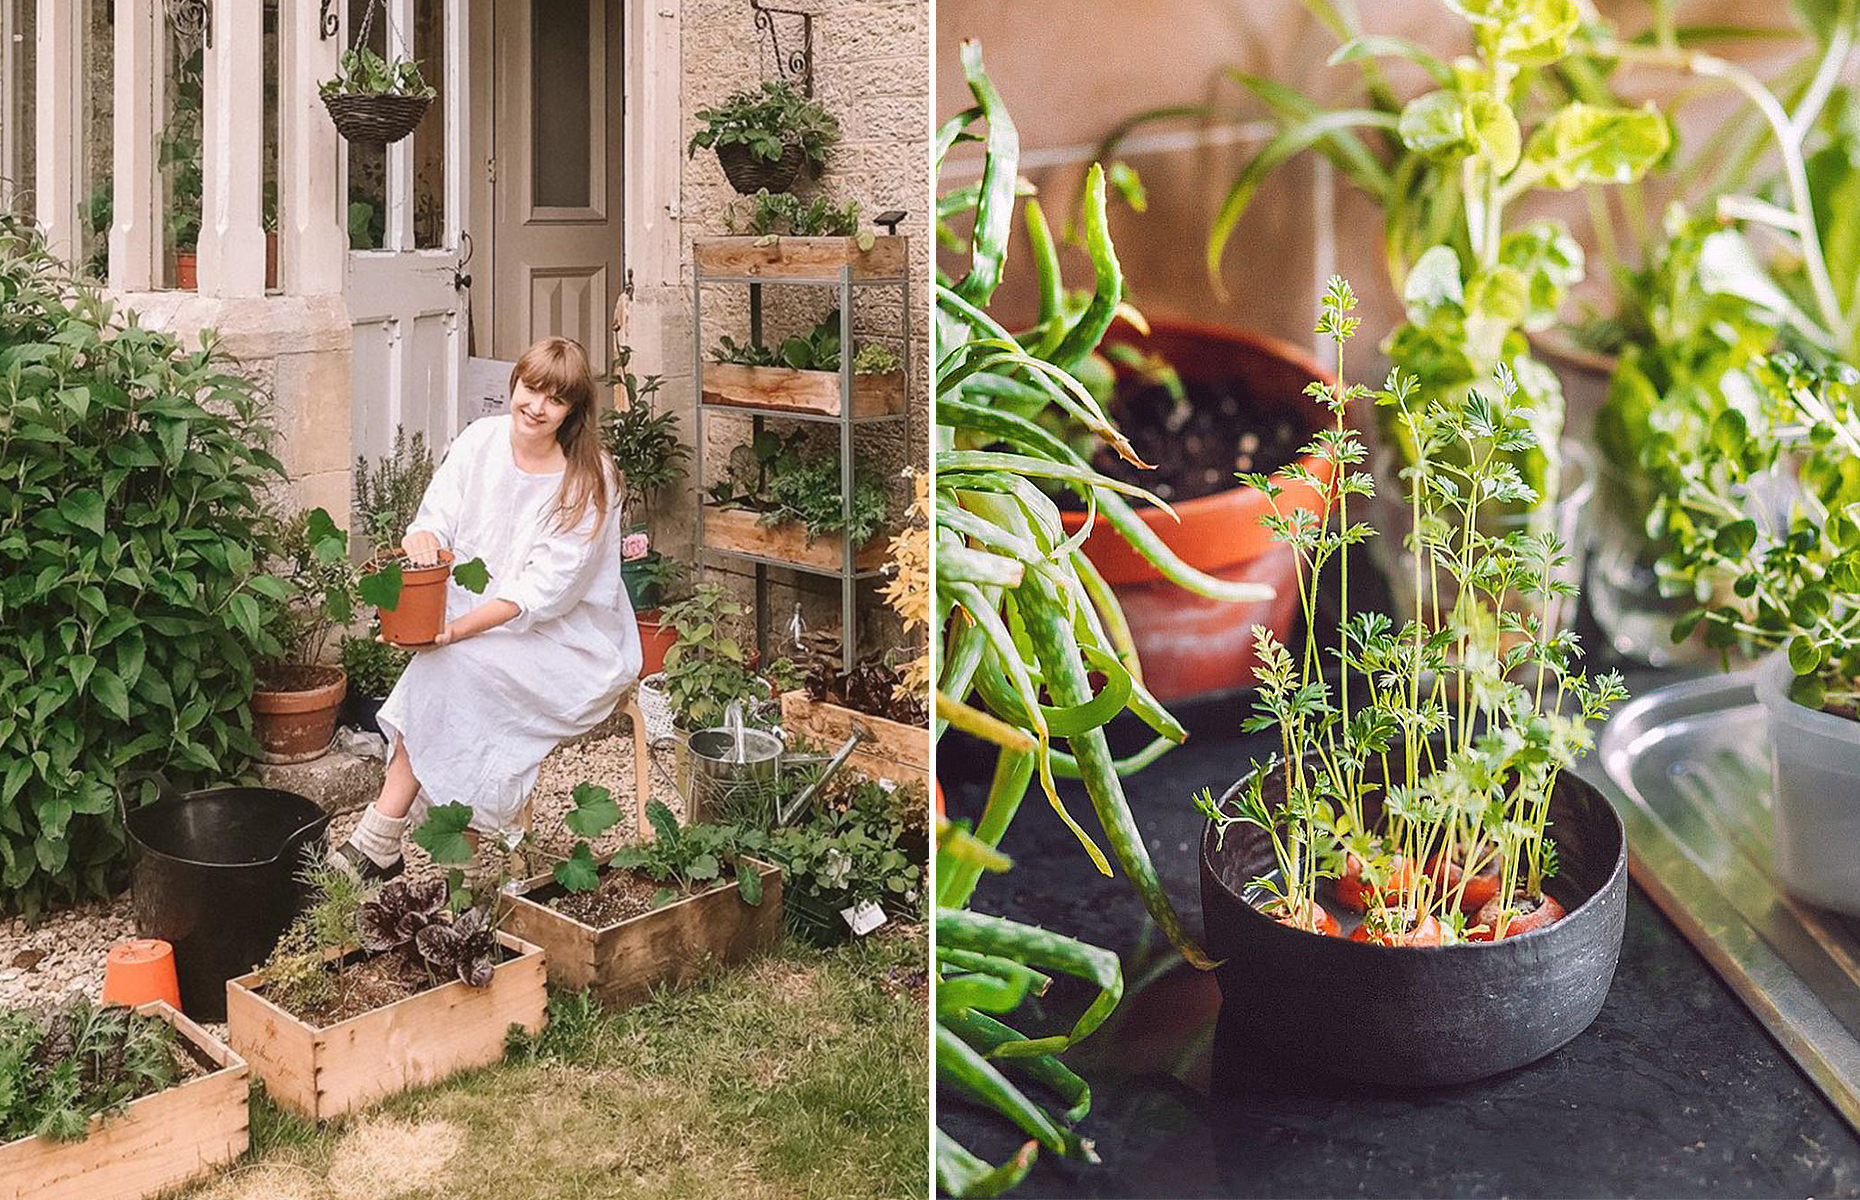 The couple are keen growers with an impressive vegetable garden at home. Image: @relivinguk / Instagram